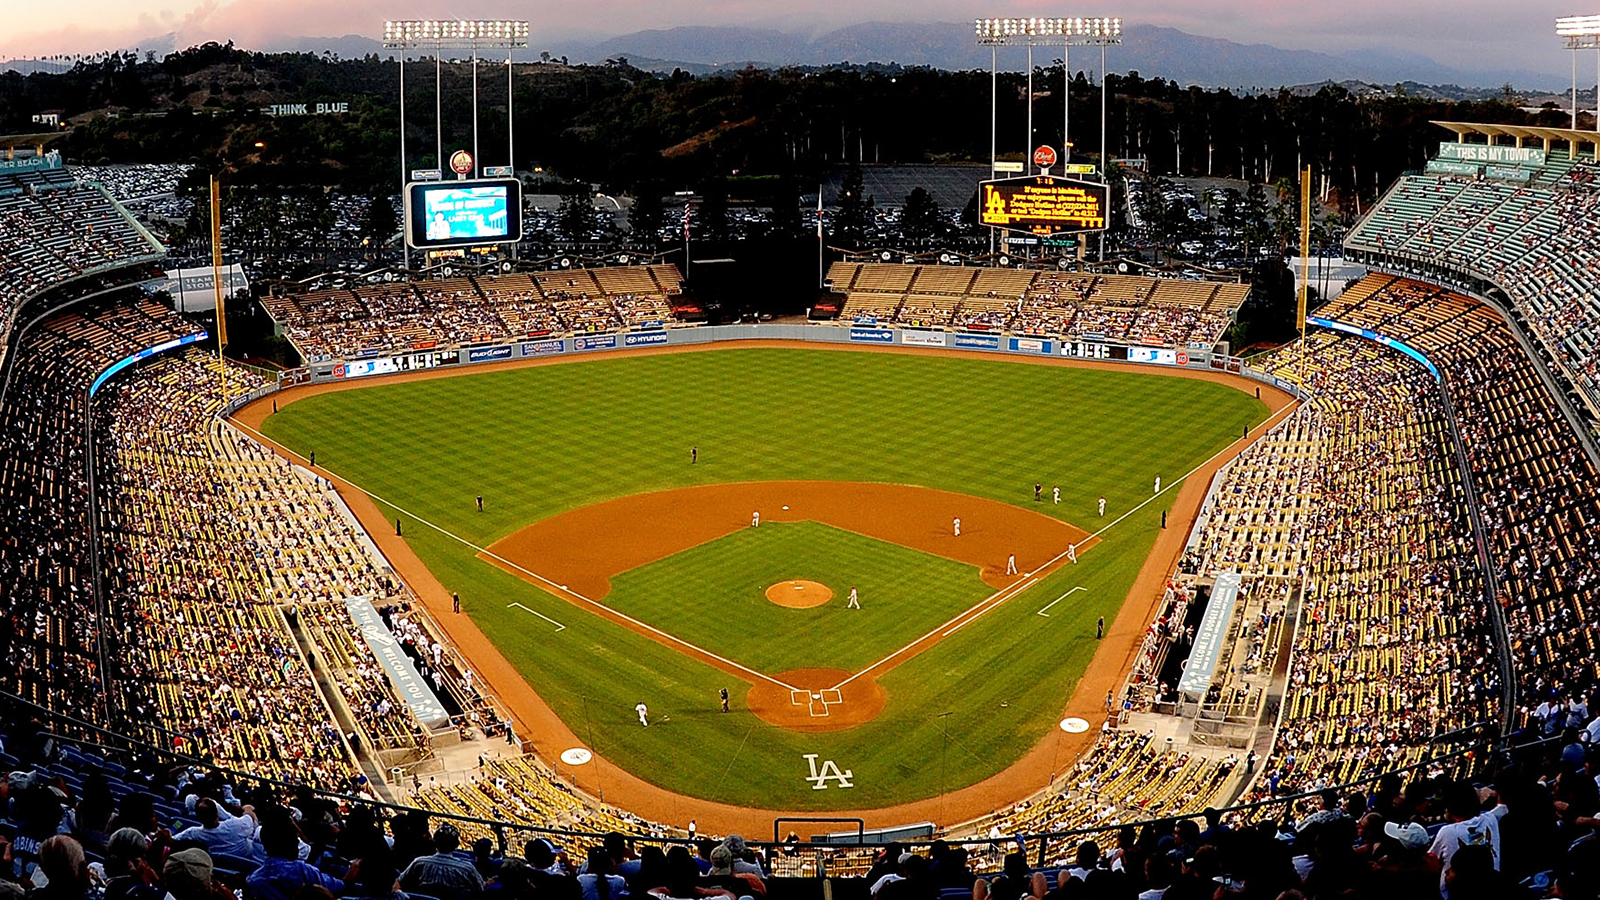 See Dodger Stadium amazing before (flooded) and after (sunny